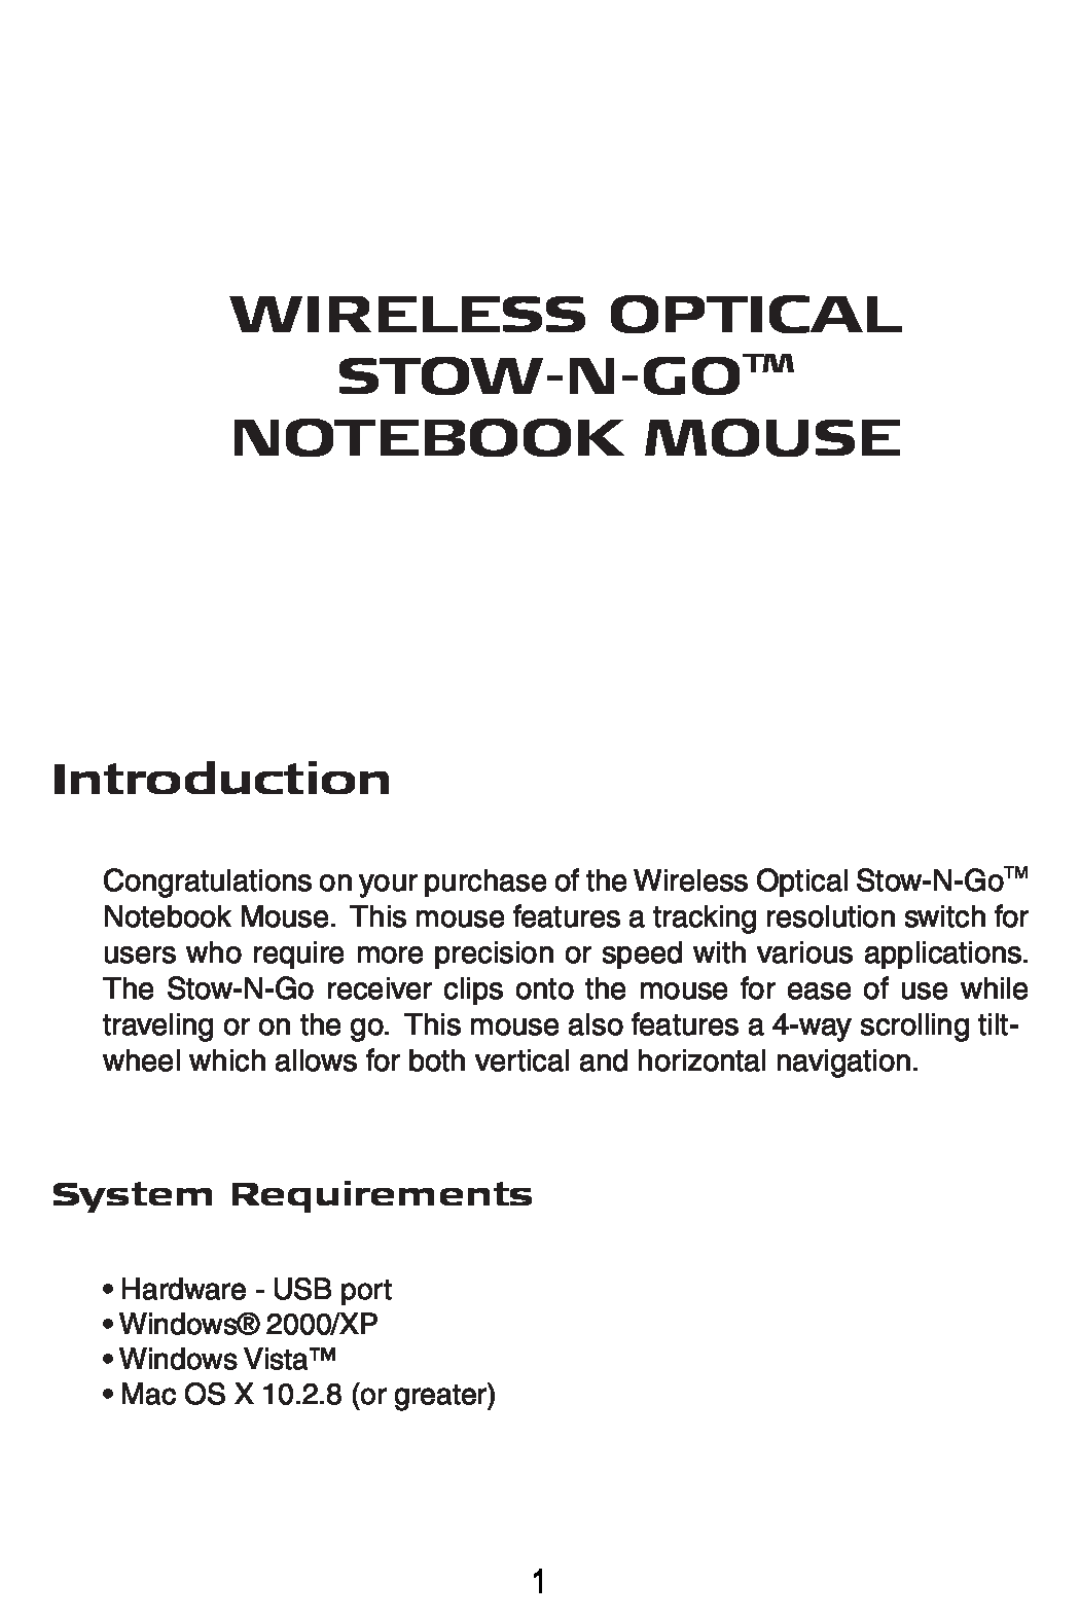 Targus Wireless Optical Stow-N-GoTM Notebook Mouse 30 specifications Introduction, System Requirements 